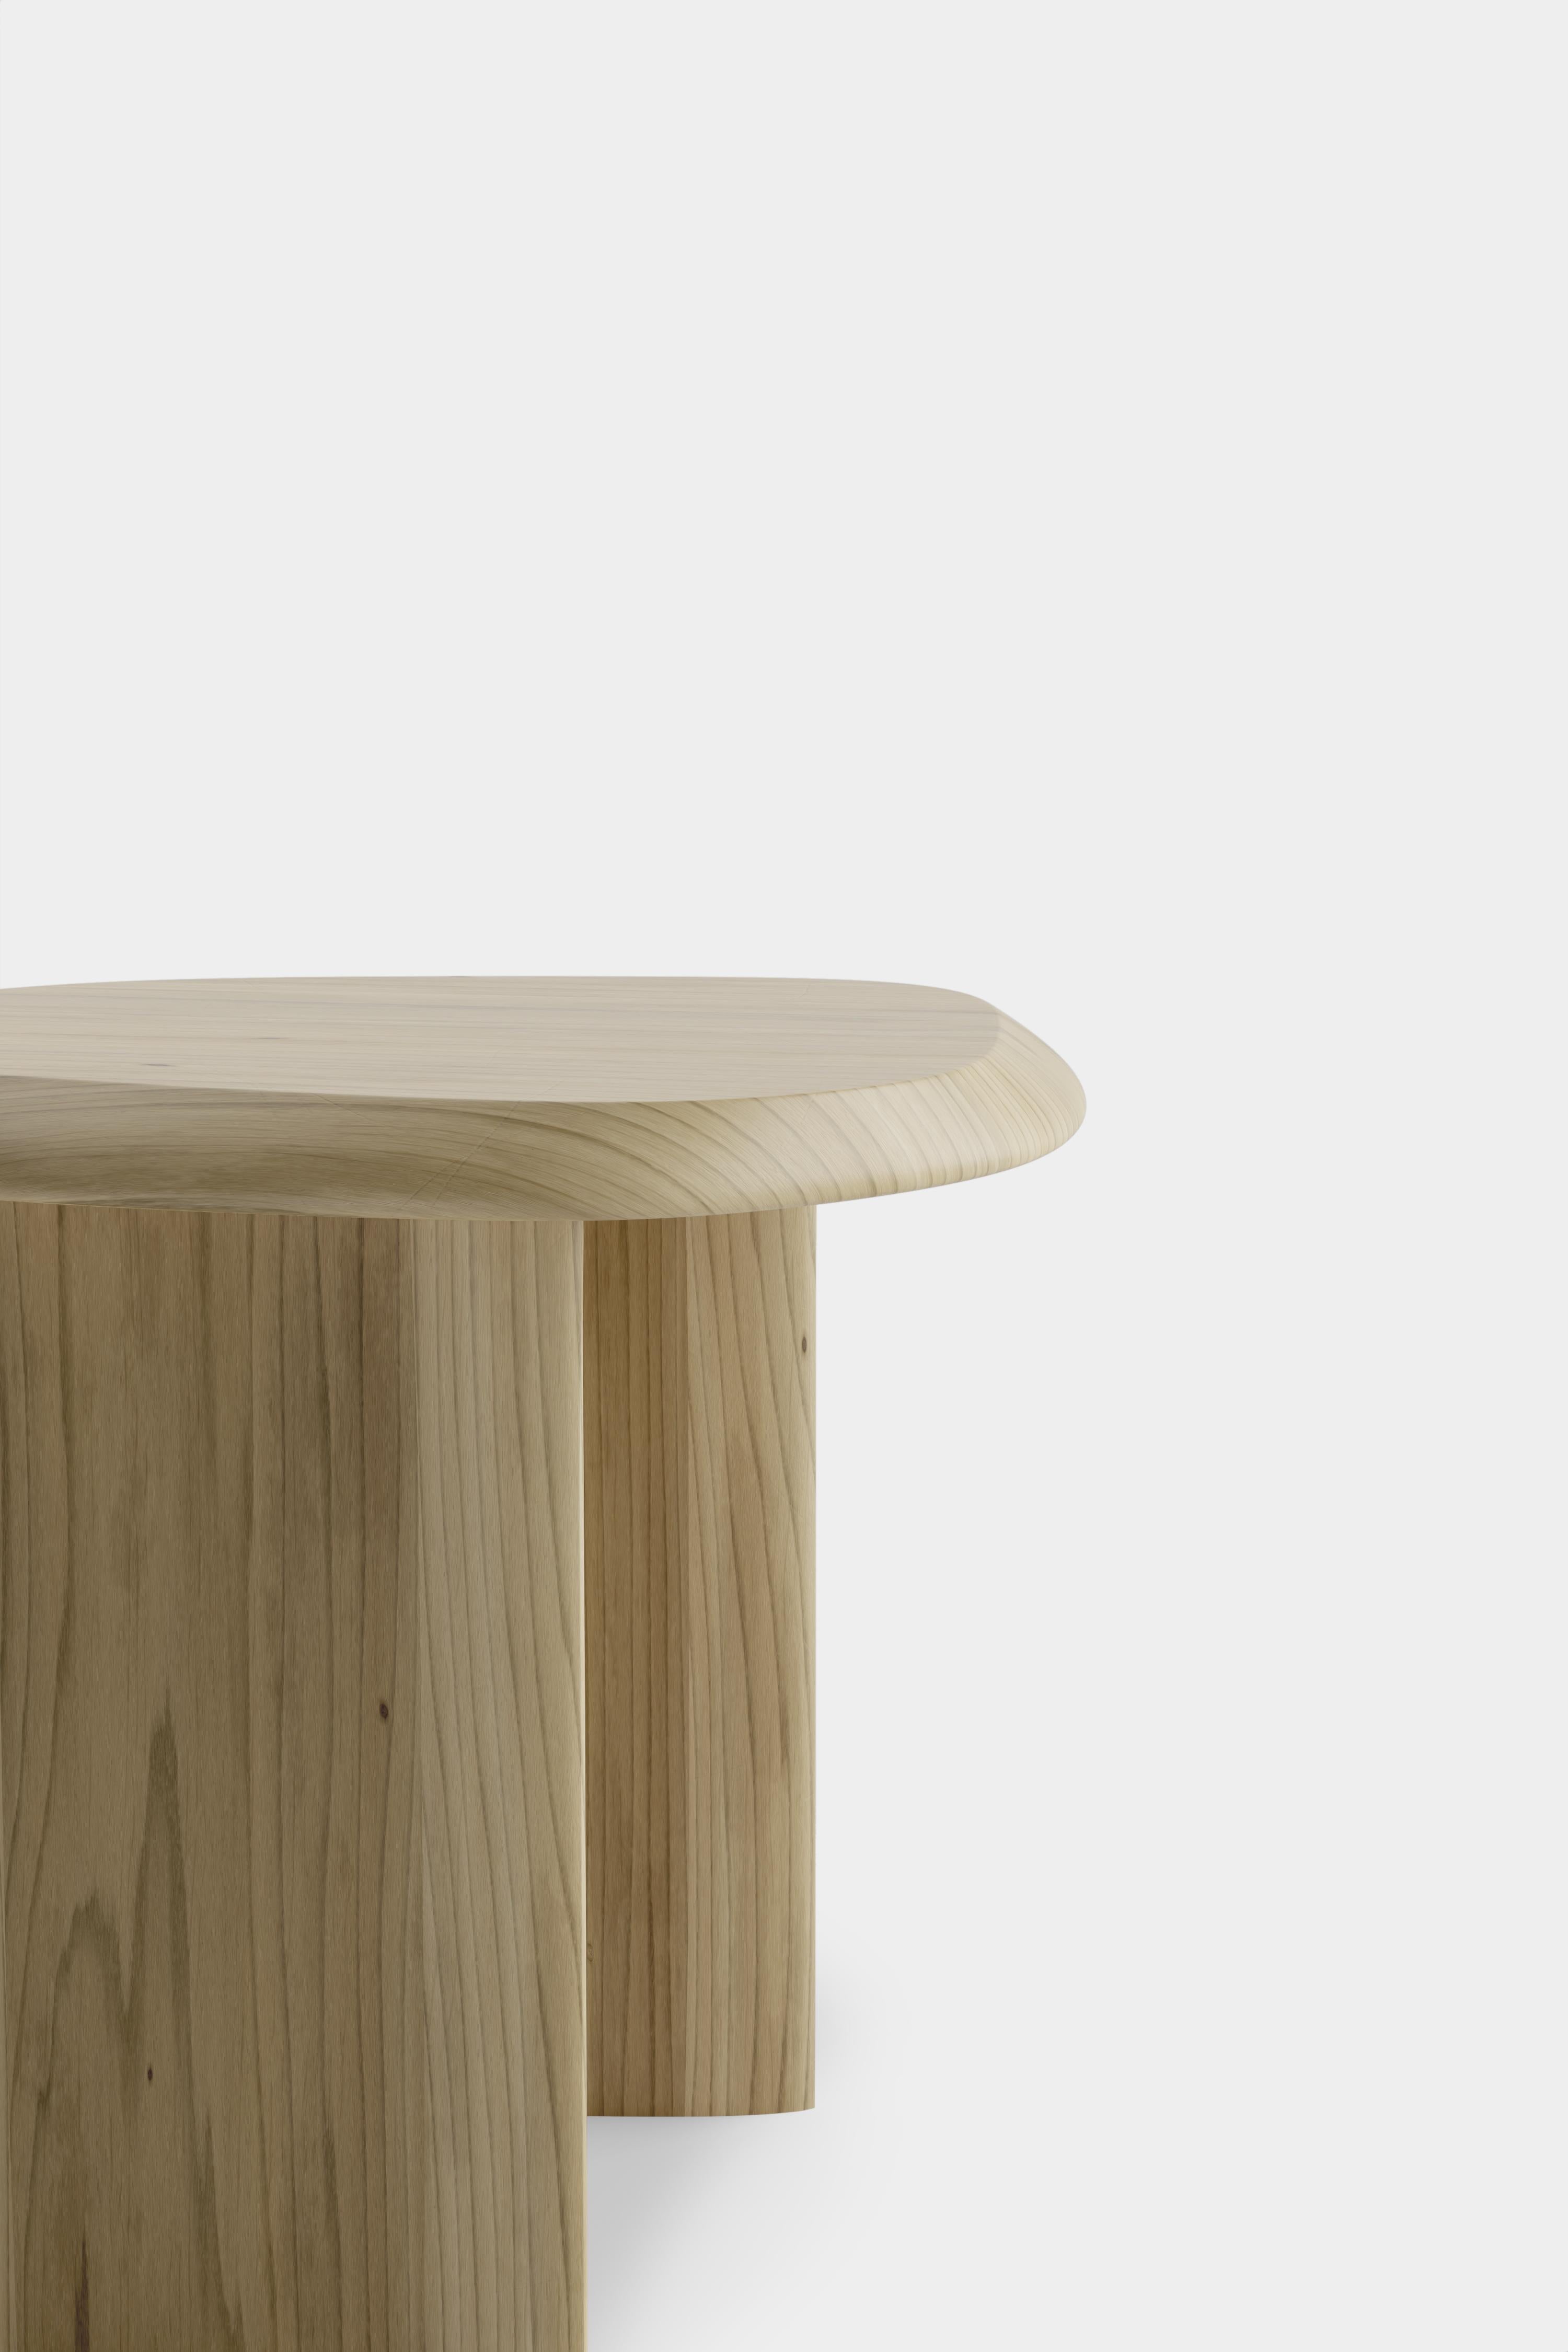 Duna Nest Table, Side Table, Bedside Table in Solid Poplar Wood by Joel Escalona For Sale 4